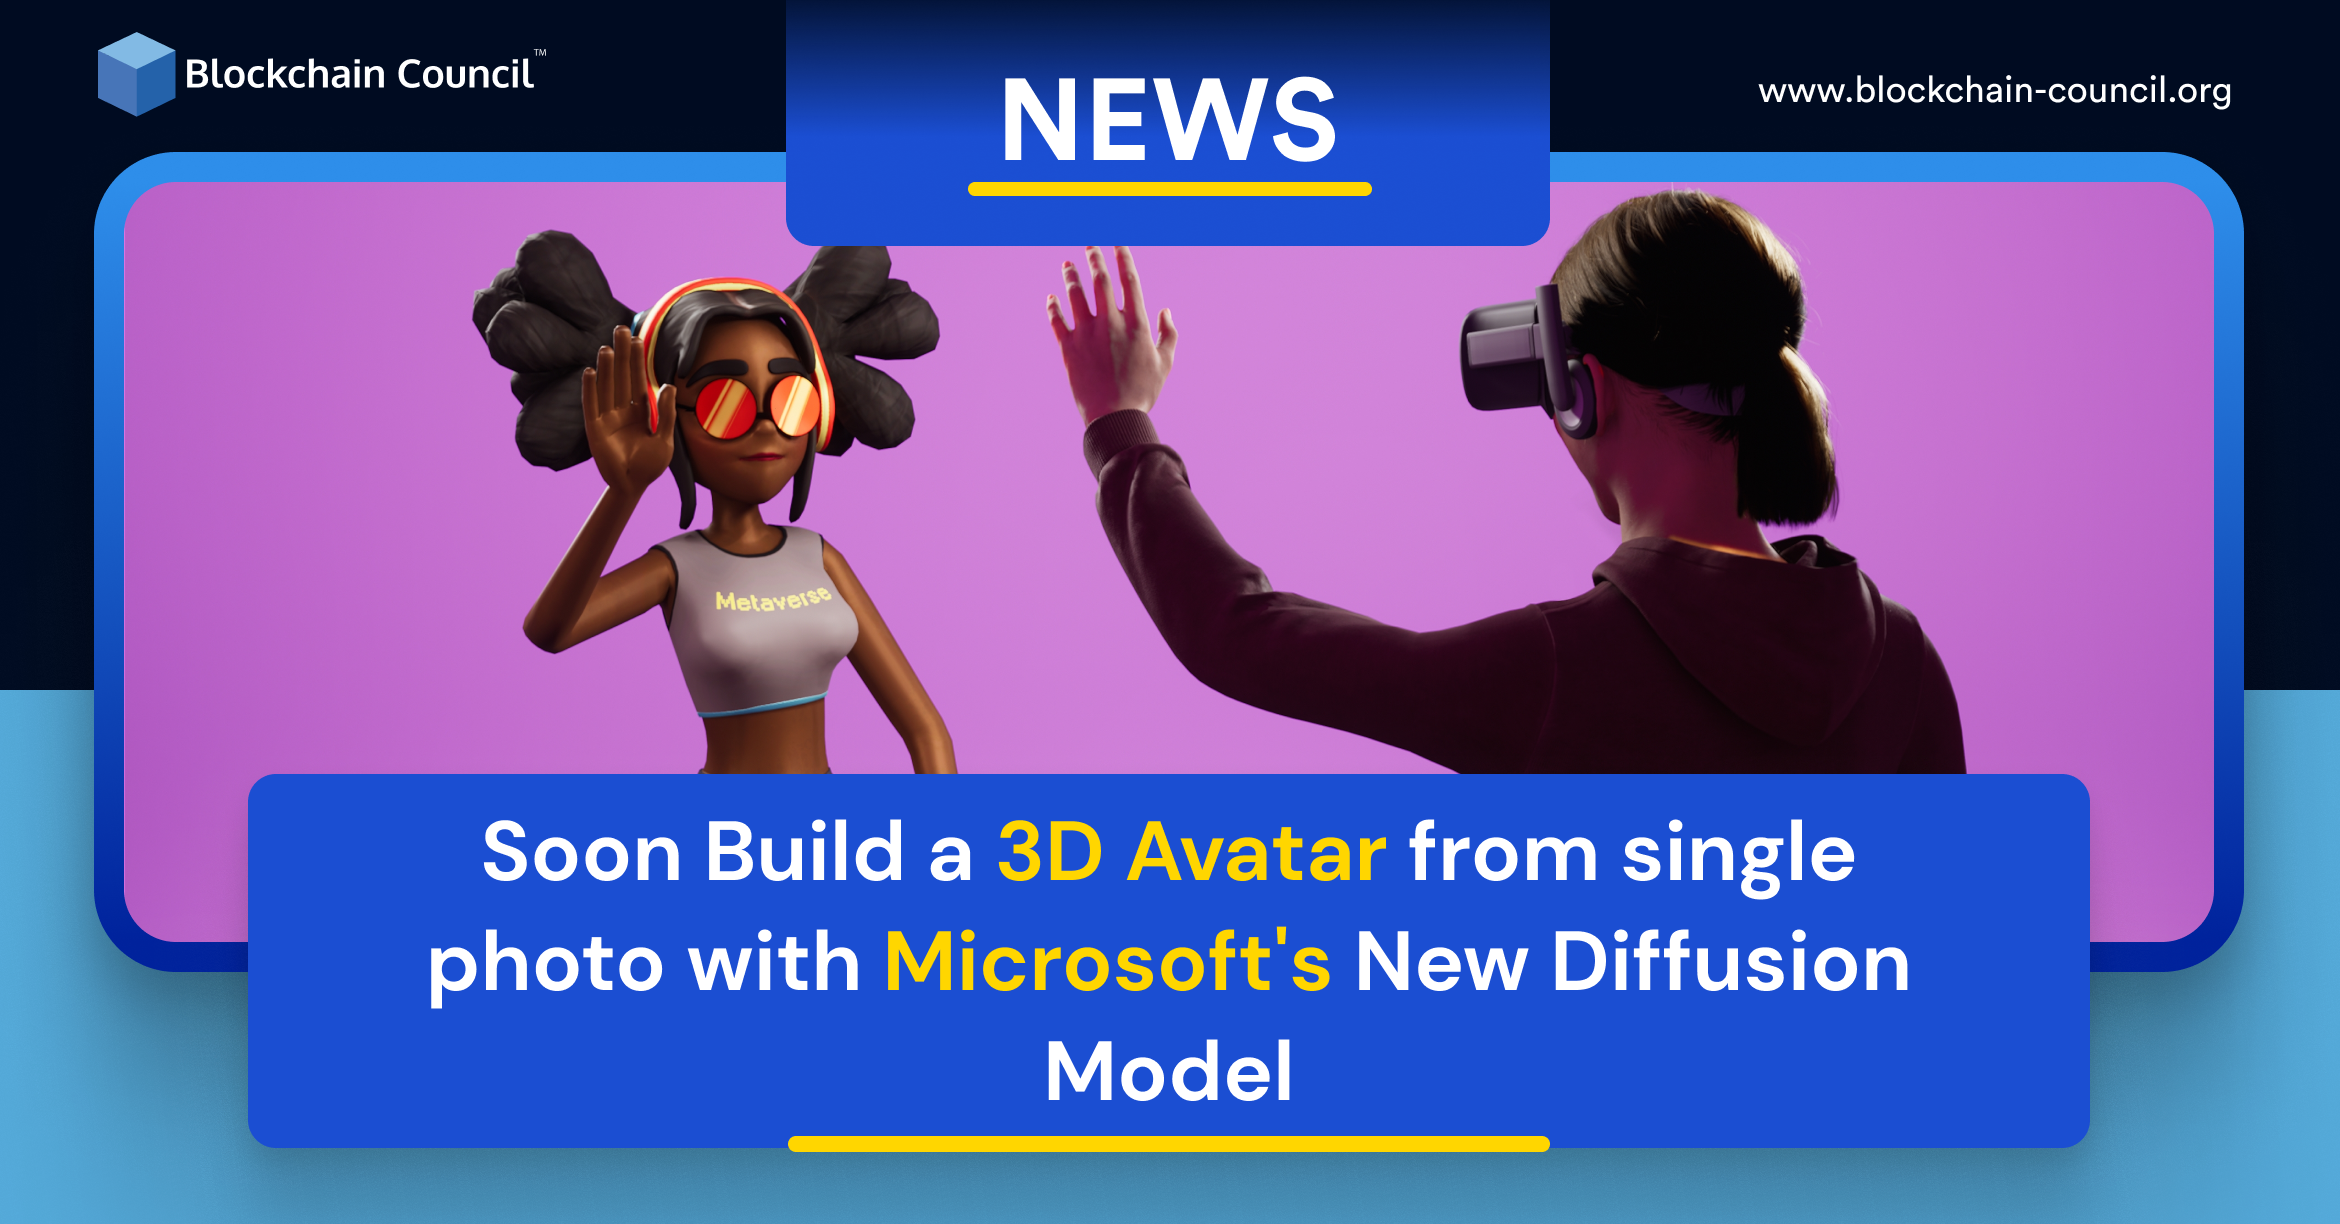 Soon Build a 3D Avatar from single photo with Microsoft's New Diffusion Model